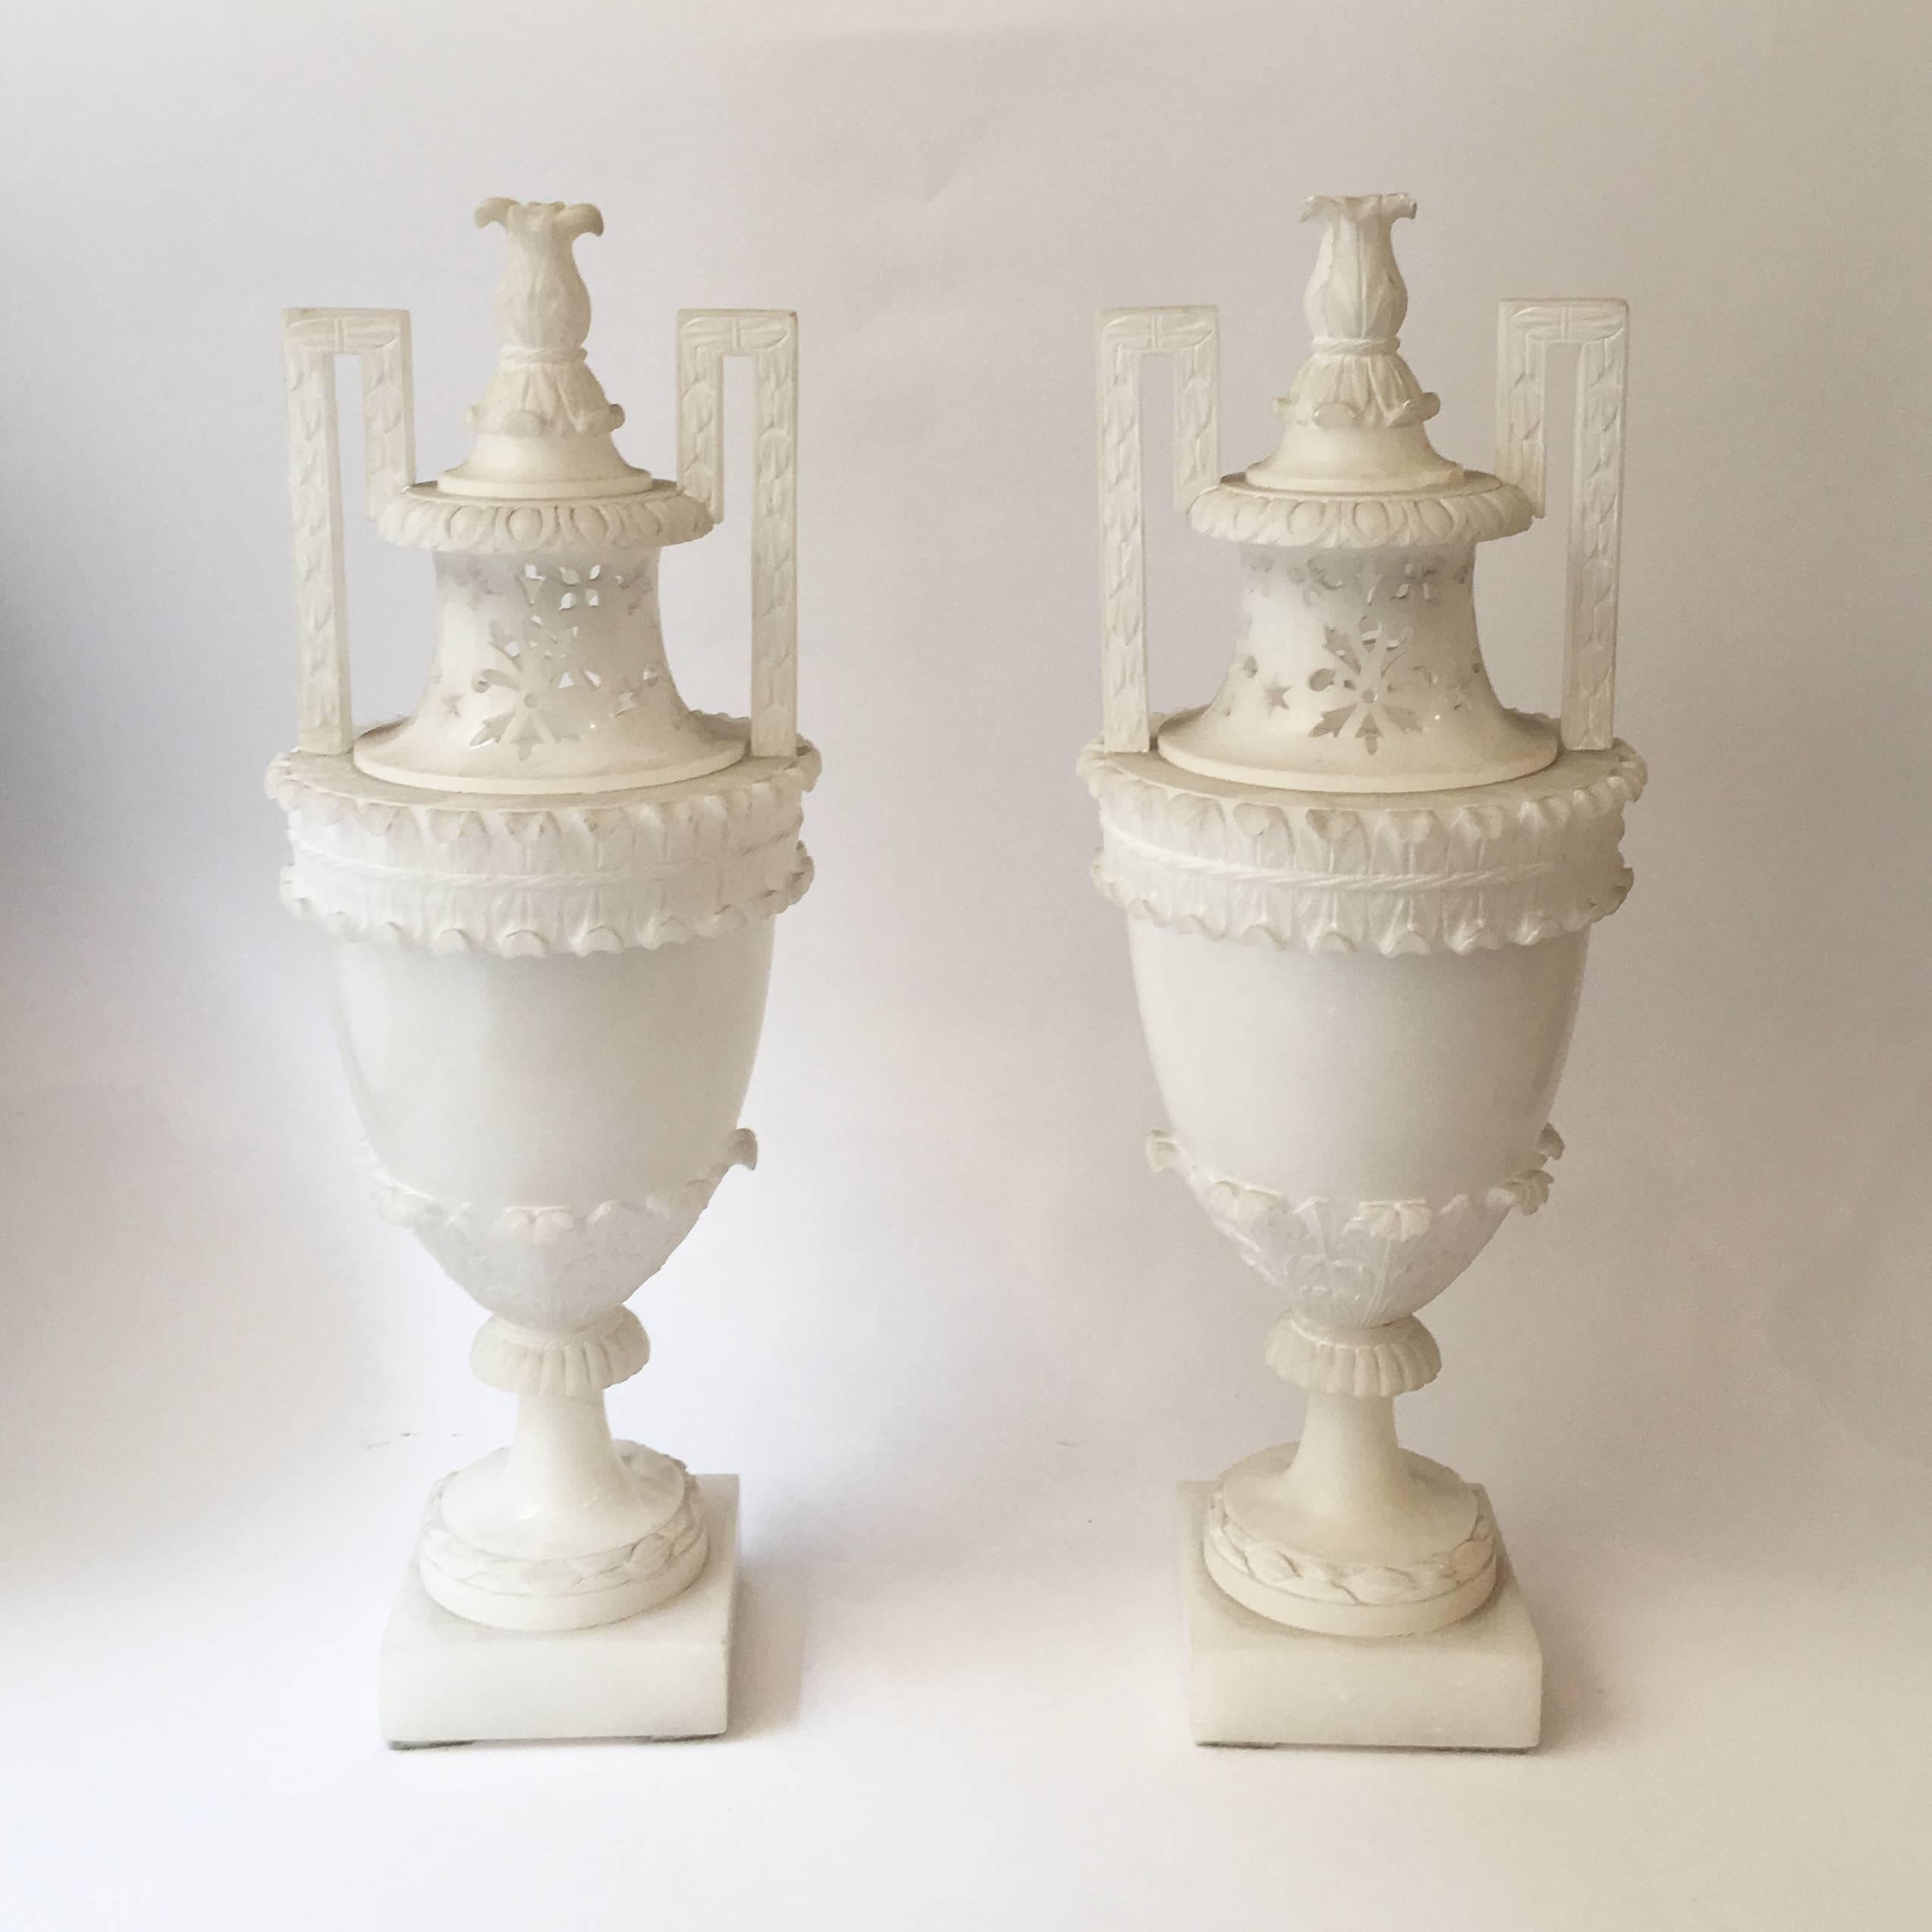 A stunning pair of Italian alabaster vases or urns.
The hand-carved vases feature a beautiful neoclassical design with floral and geometric forms.
Both vases present a small lid and are in good state of conservation.
Italian manufactory, early